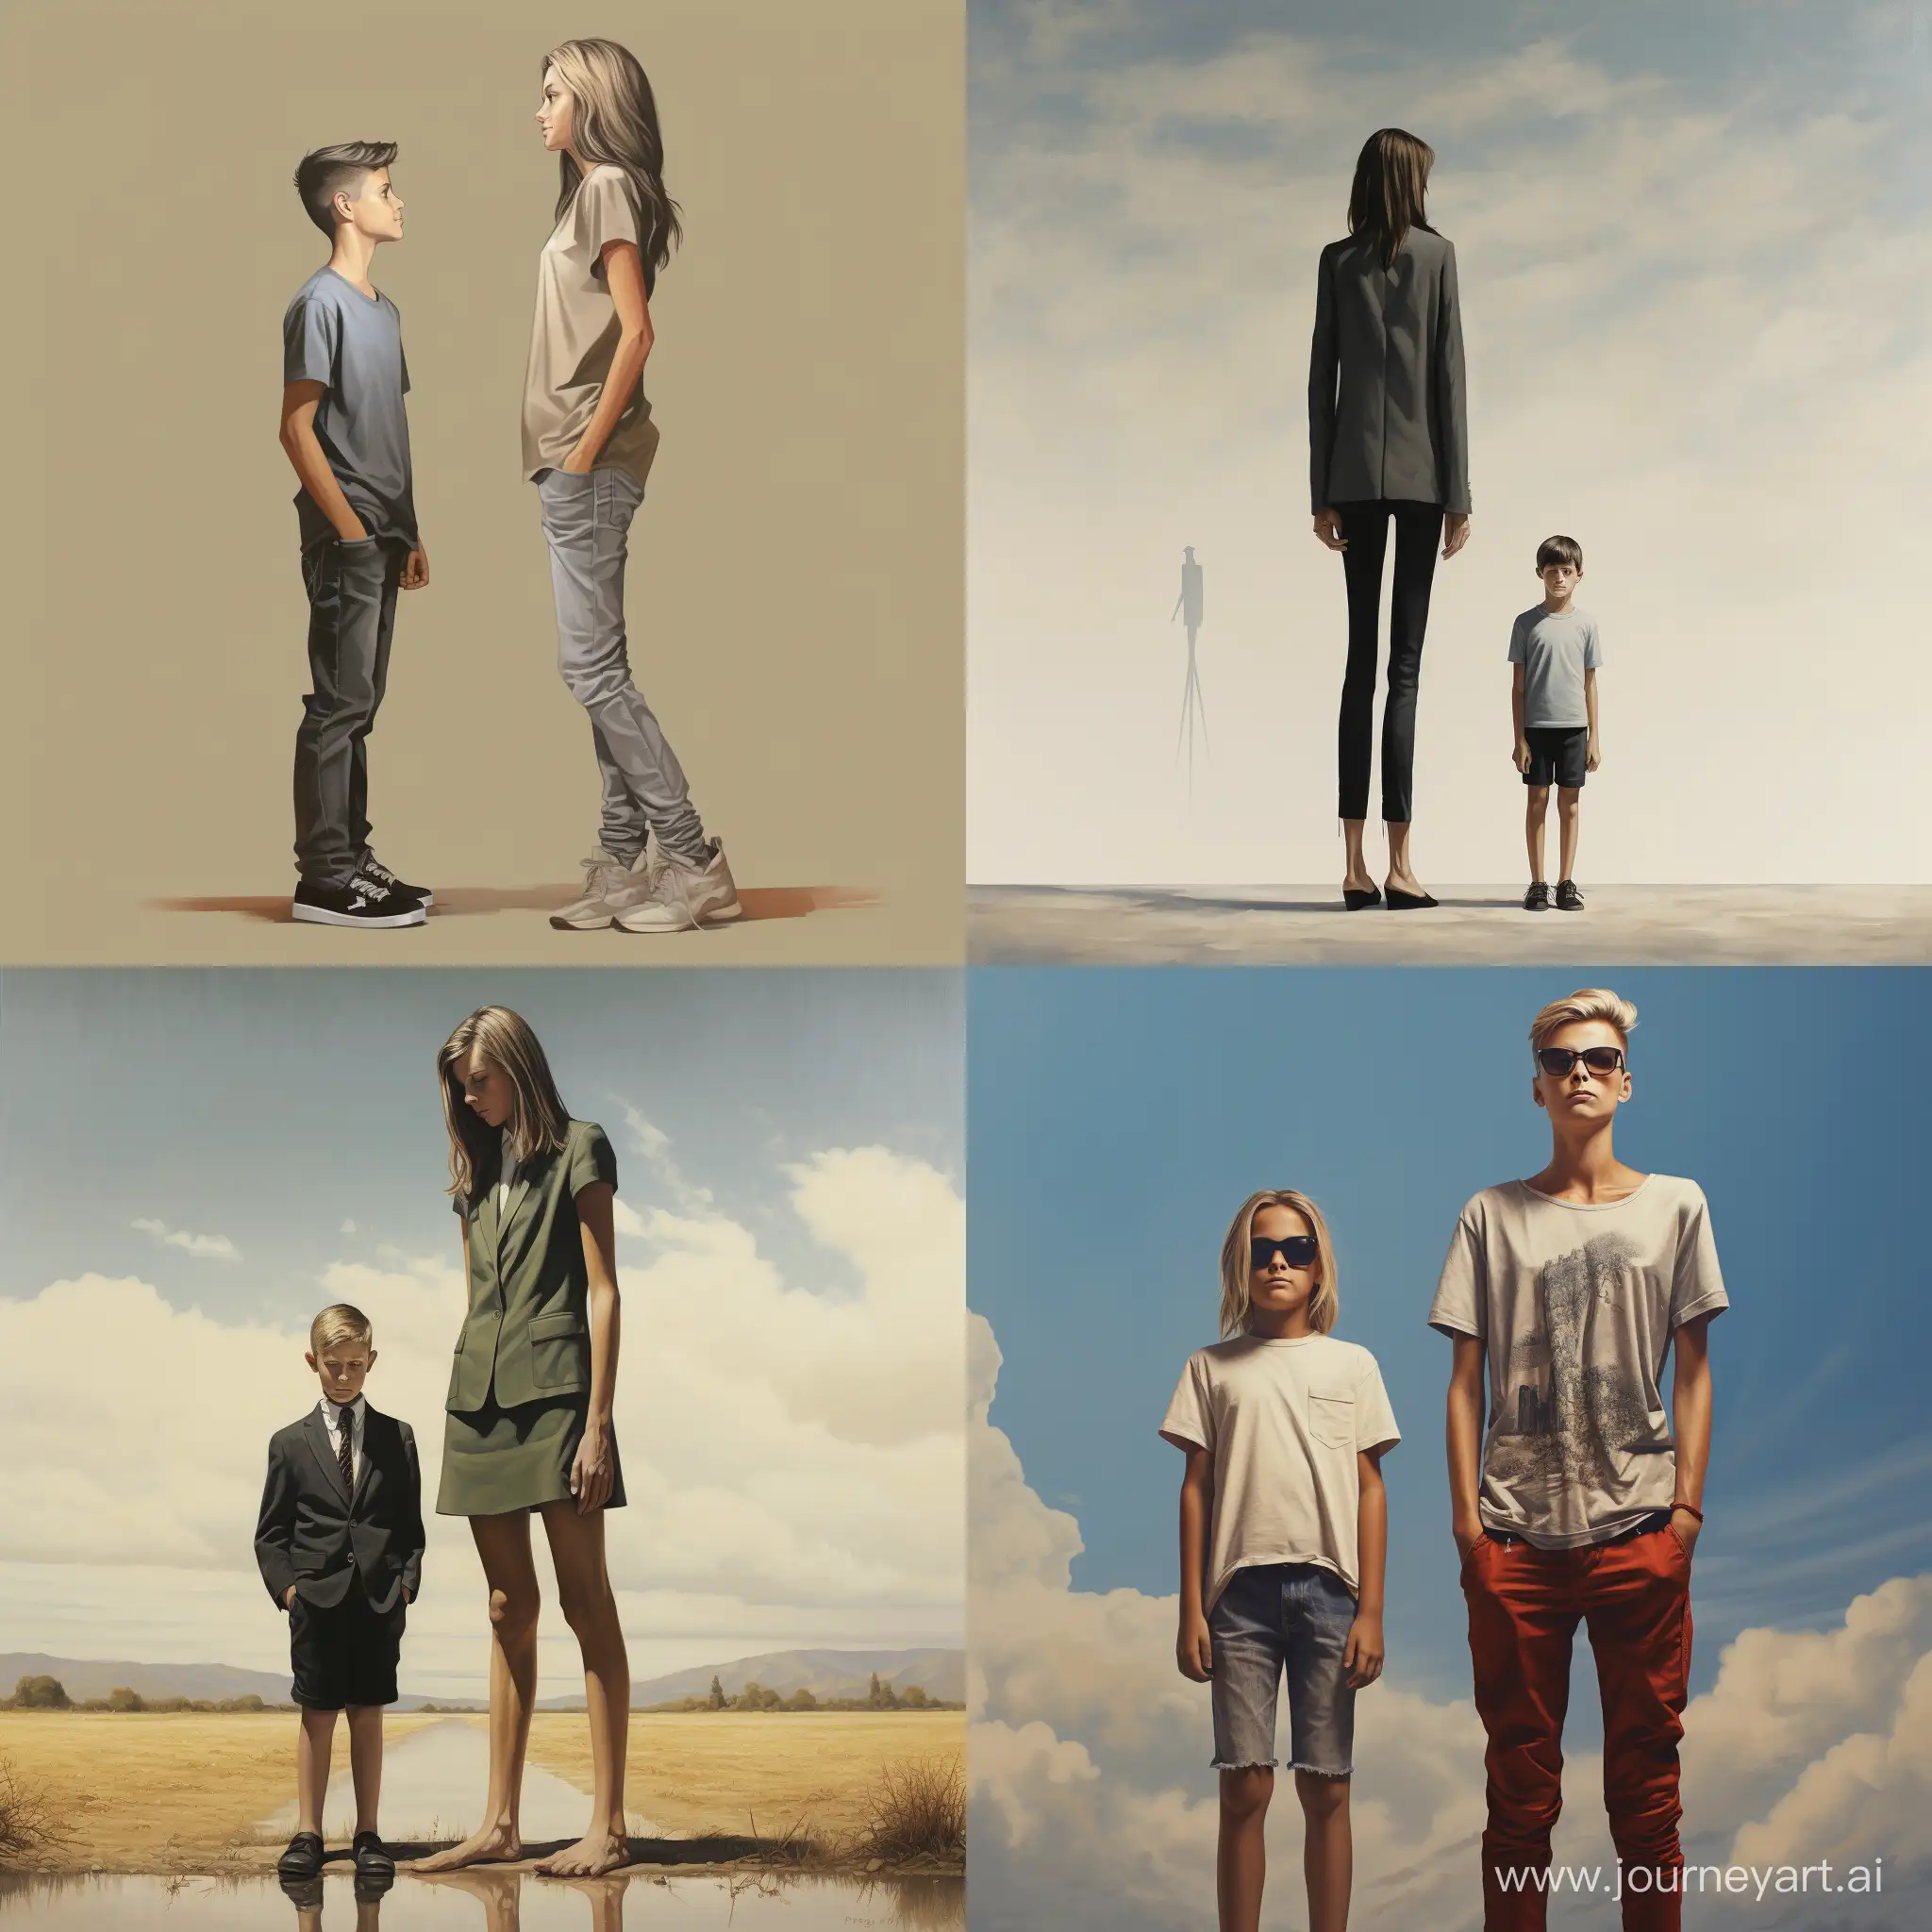 Tall-Woman-and-Small-Stature-14YearOld-Boy-in-Artistic-Harmony